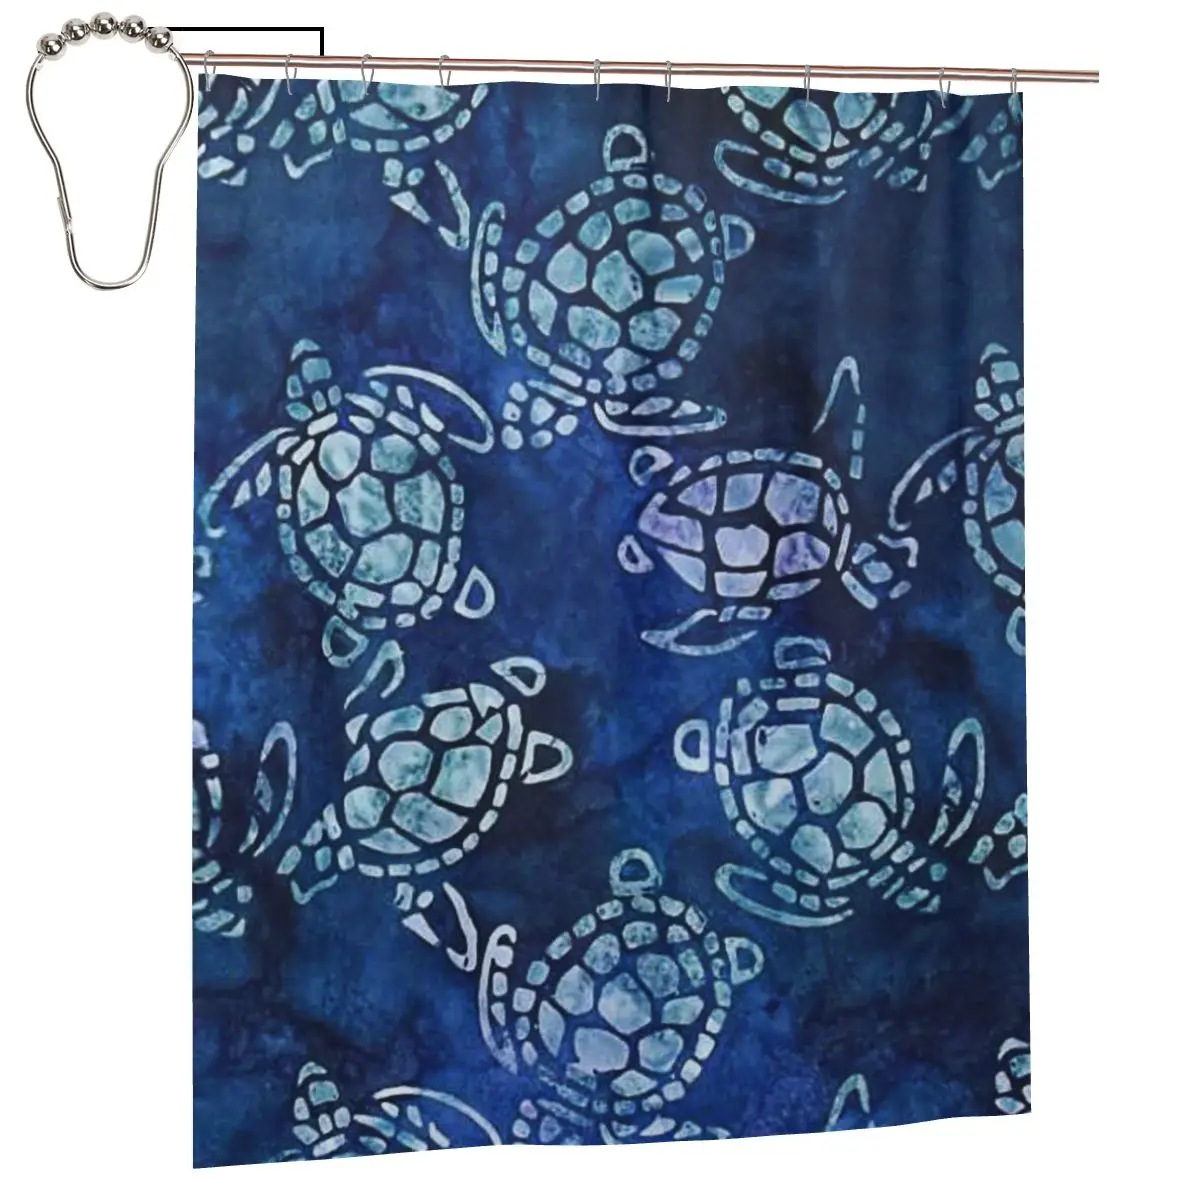 

Sea Turtles Shower Curtain for Bathroon Personalized Funny Bath Curtain Set with Iron Hooks Home Decor Gift 60x72in